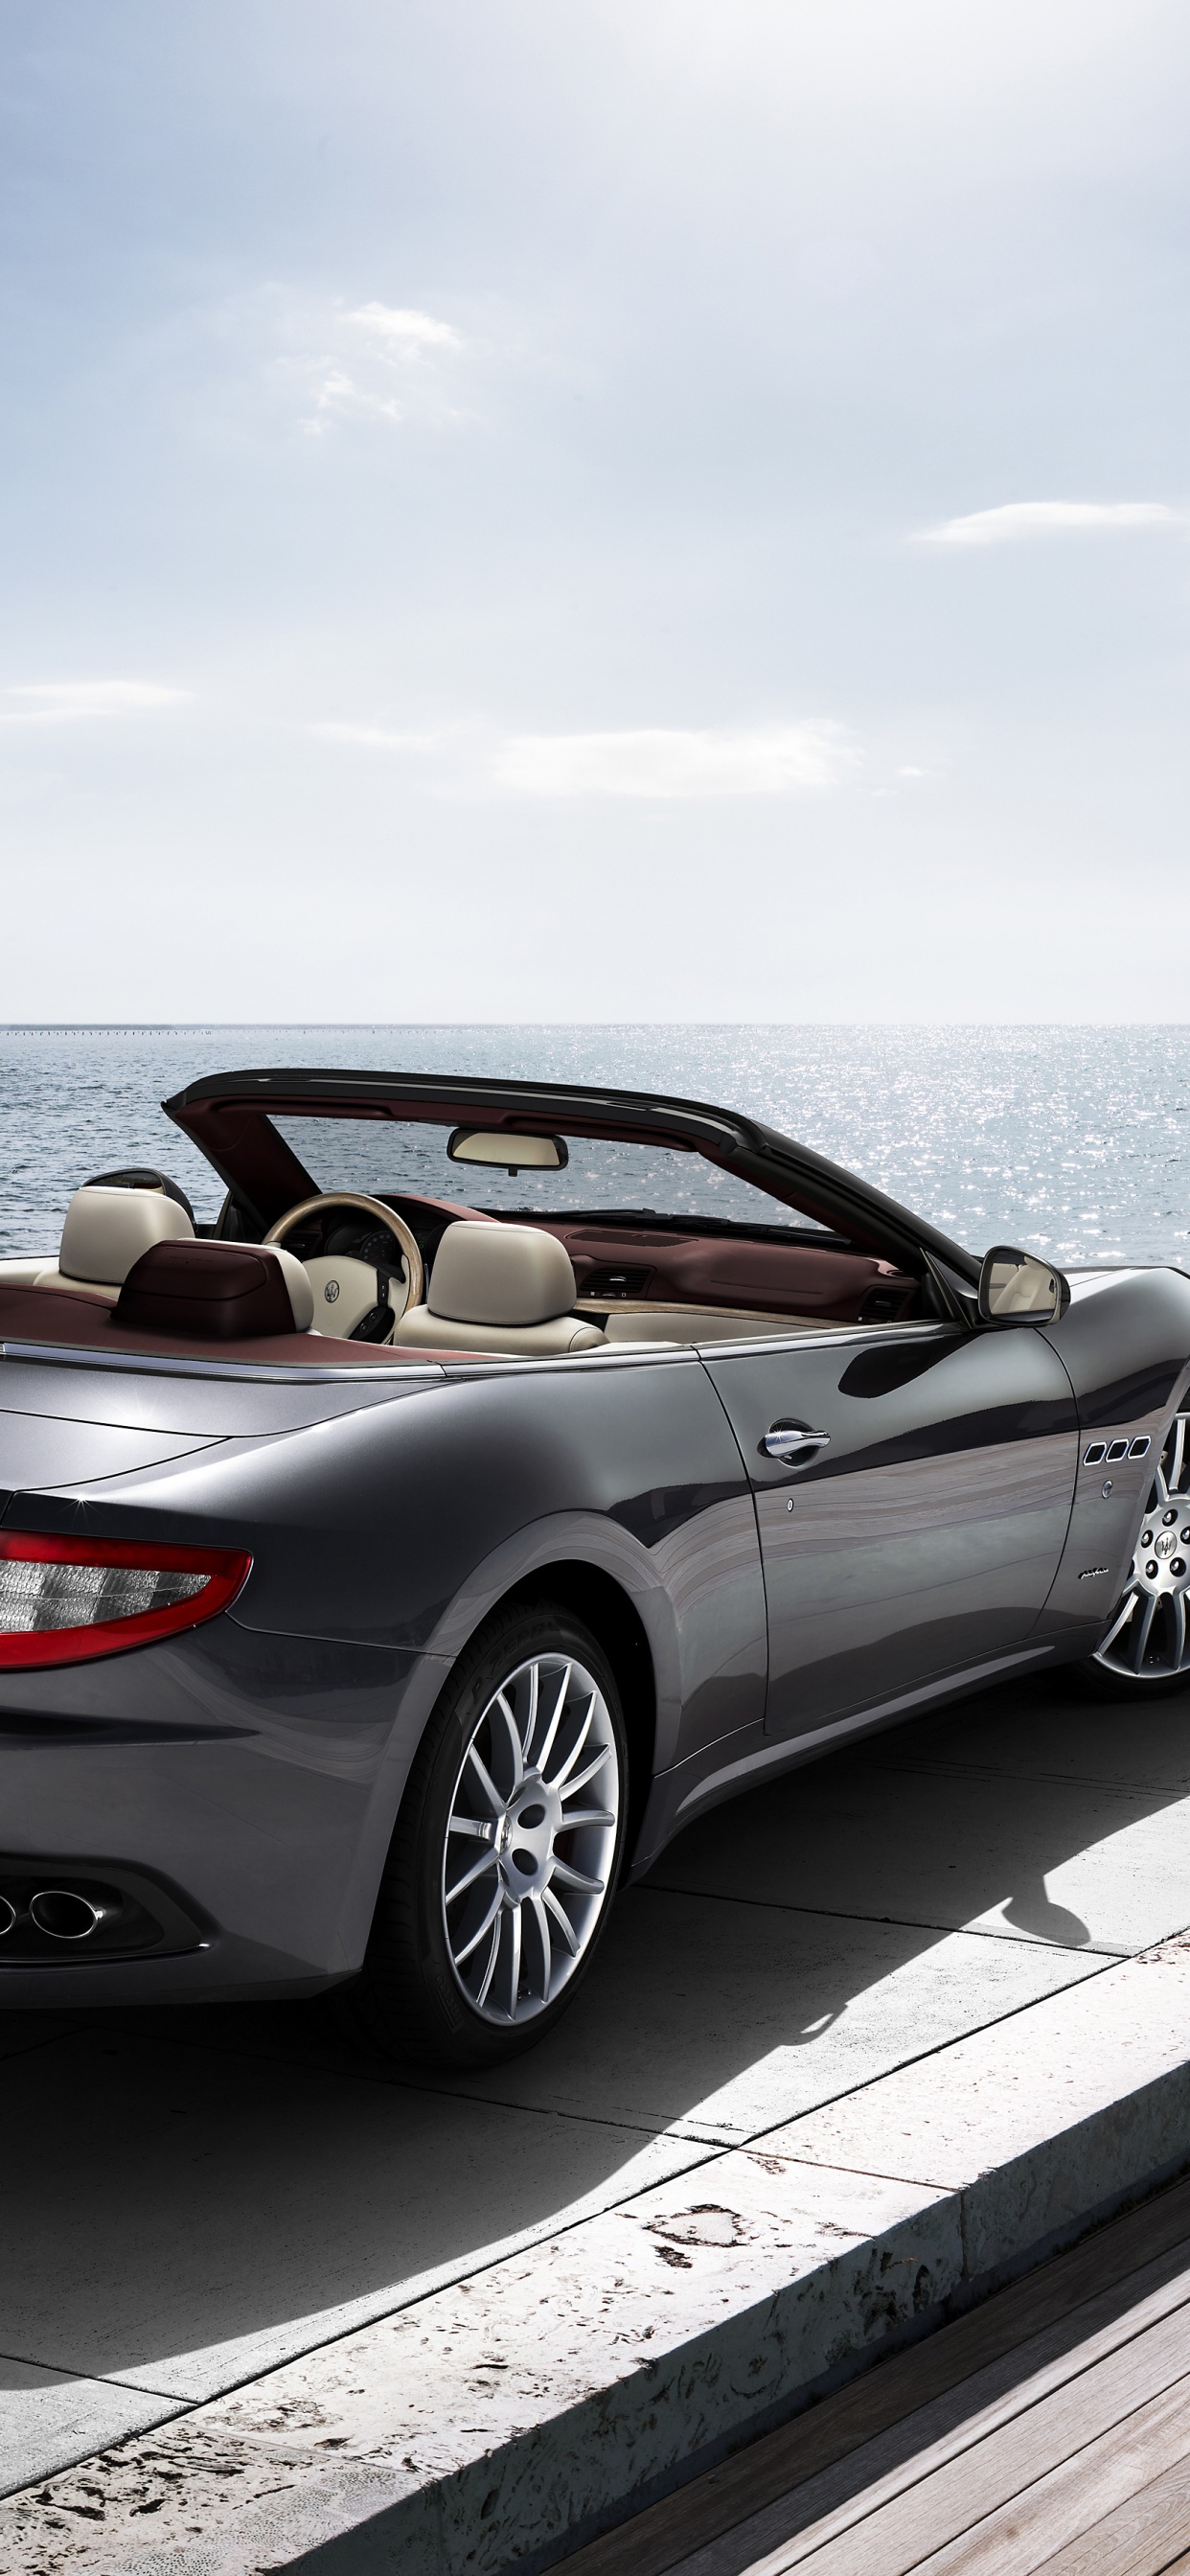 Silver Mercedes Benz Convertible Coupe Parked on Dock During Daytime. Wallpaper in 1242x2688 Resolution